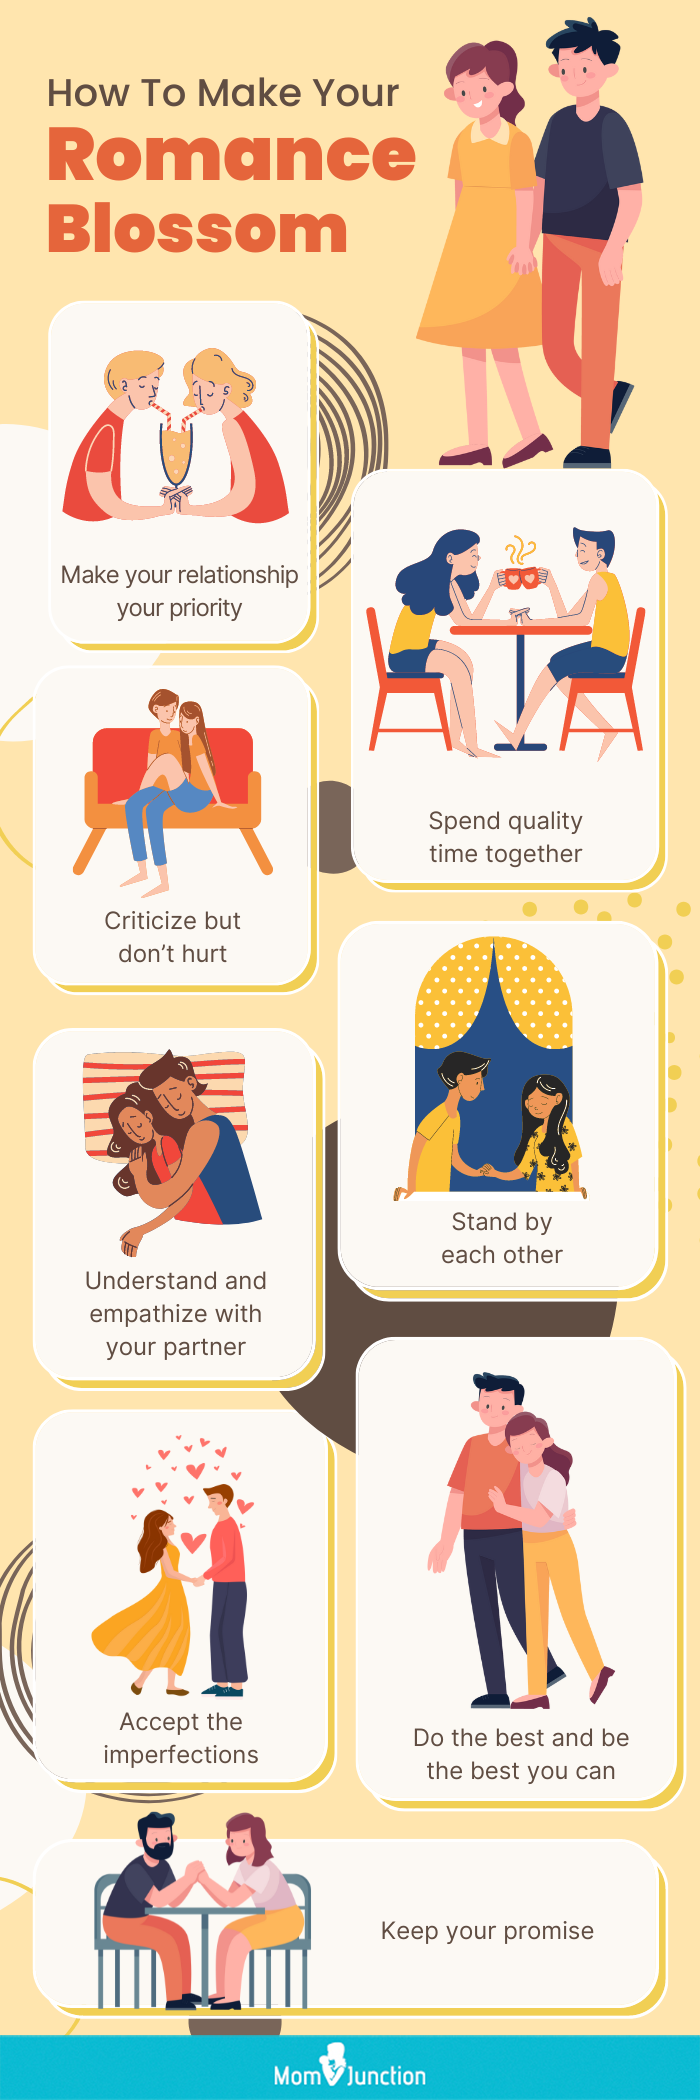 how to make your romance blossom (infographic)